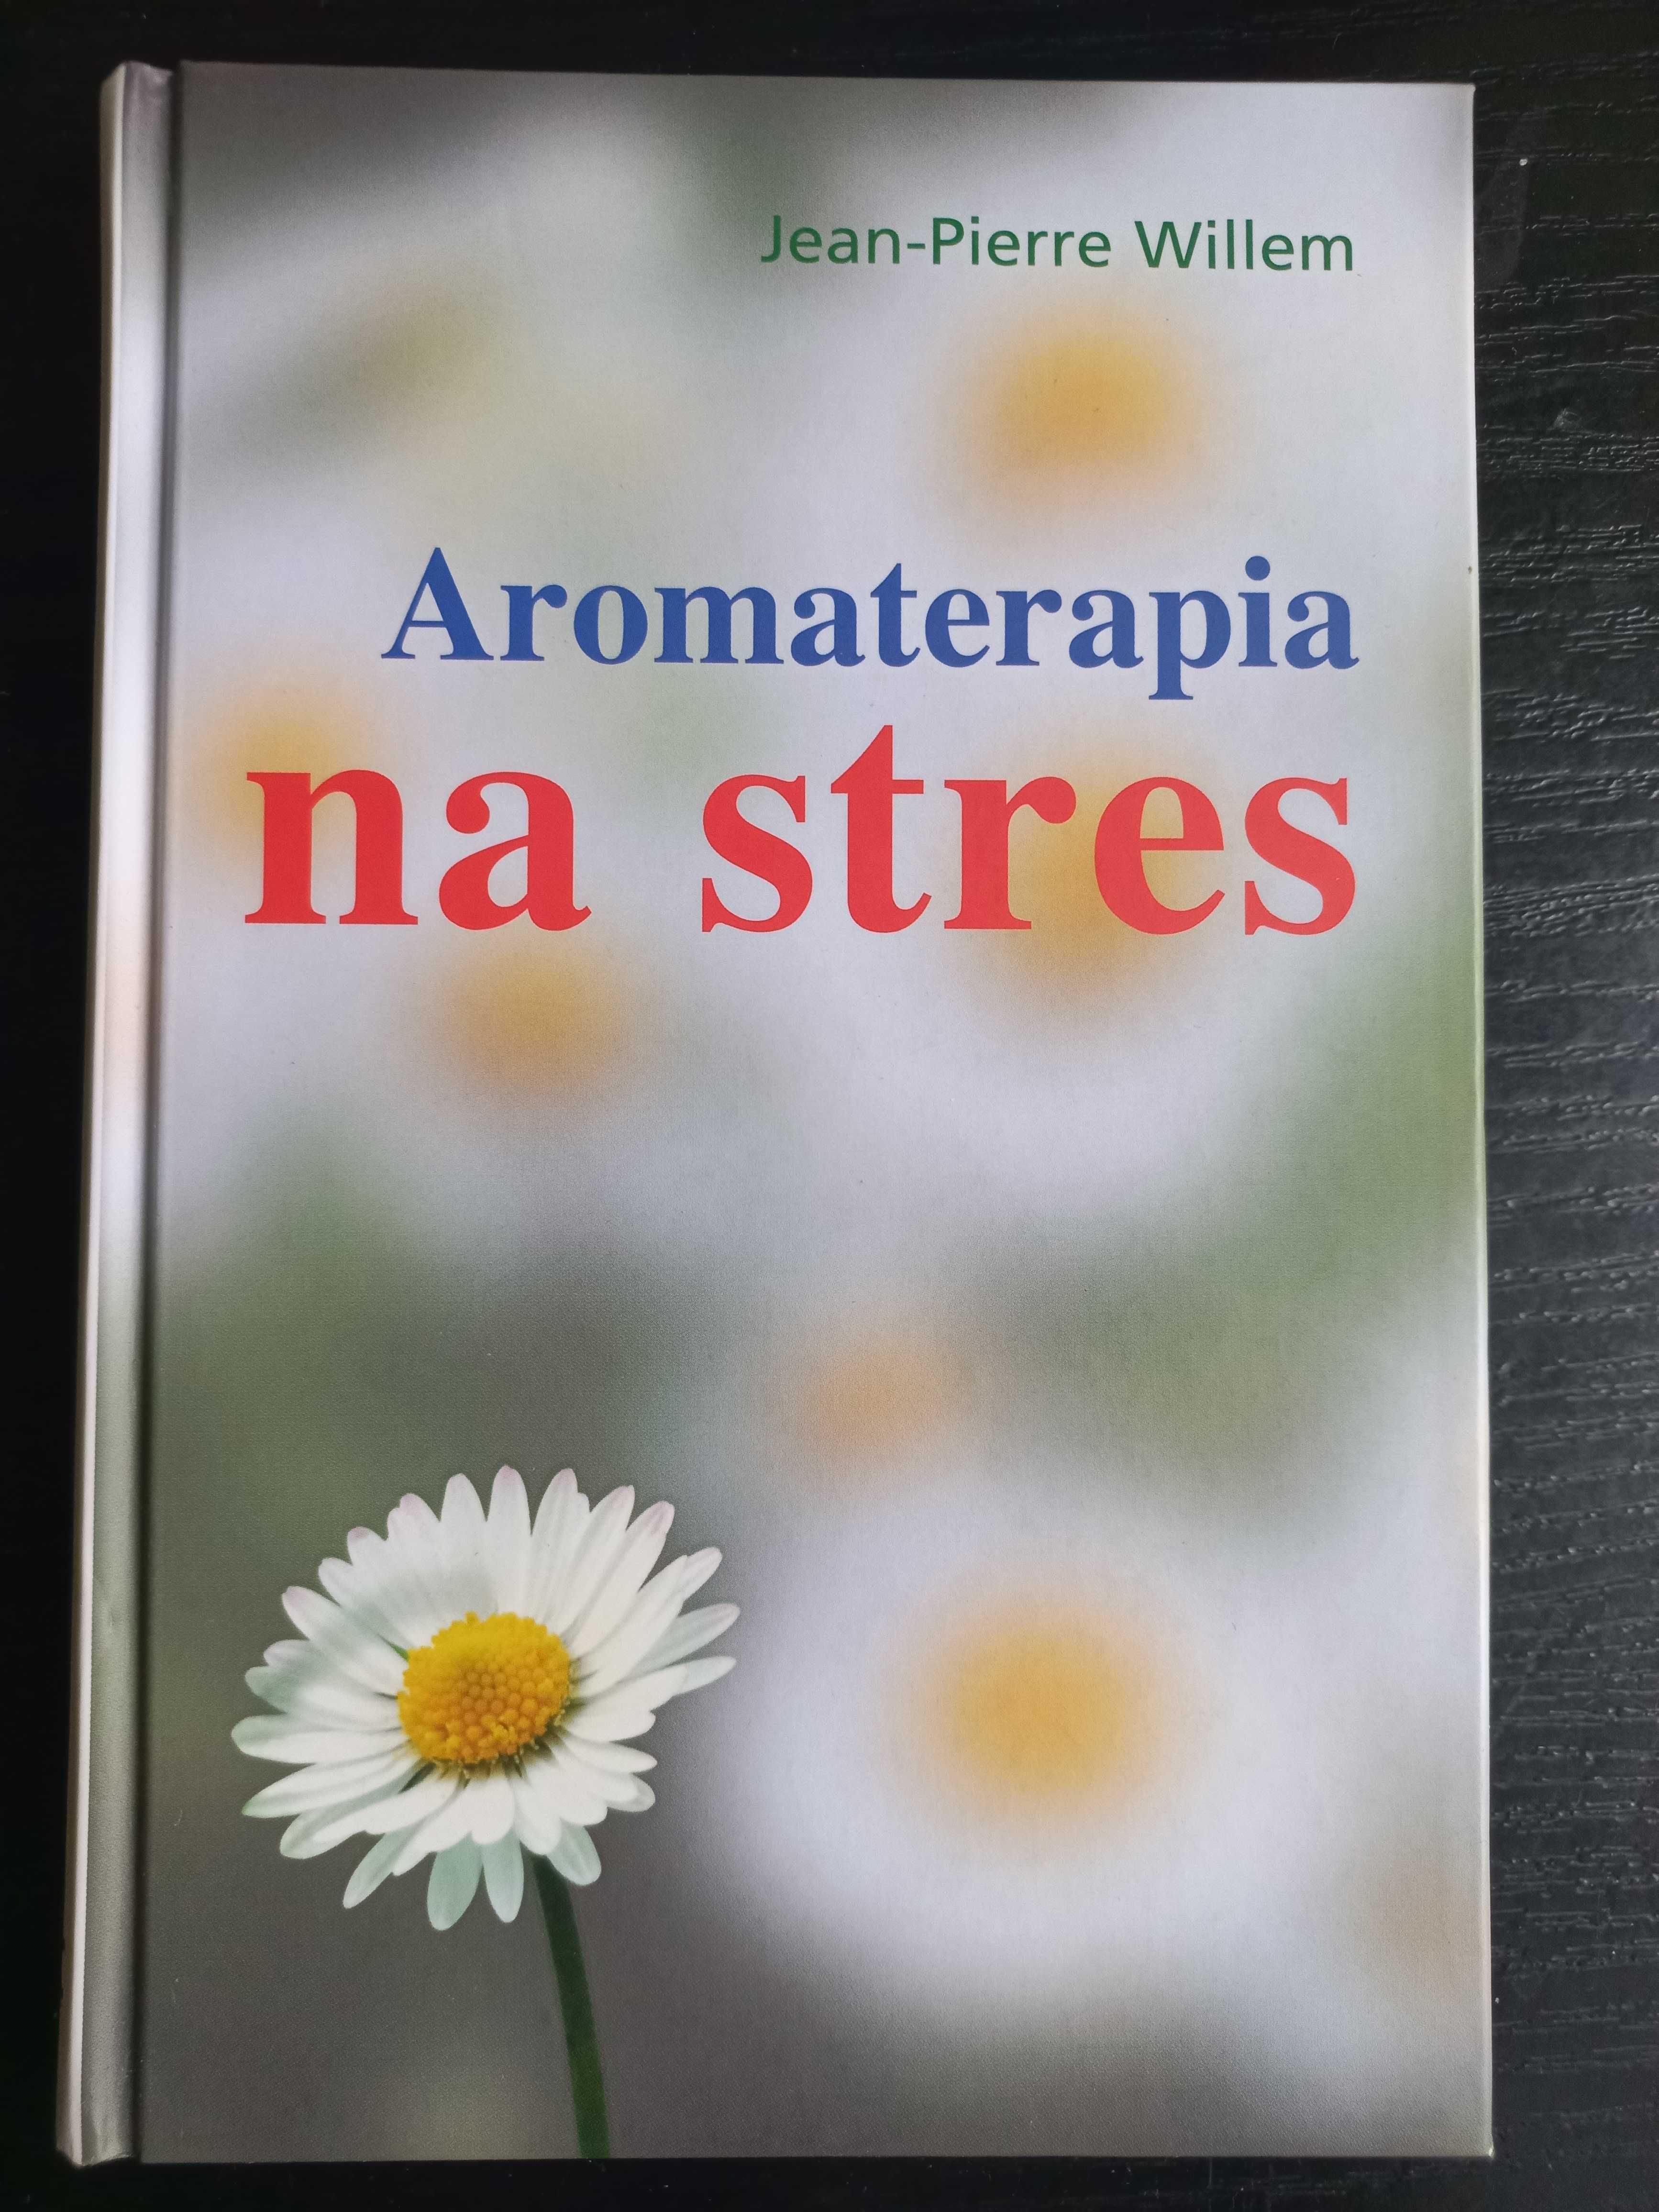 Aromaterapia na stres Jean-Pierre Willem